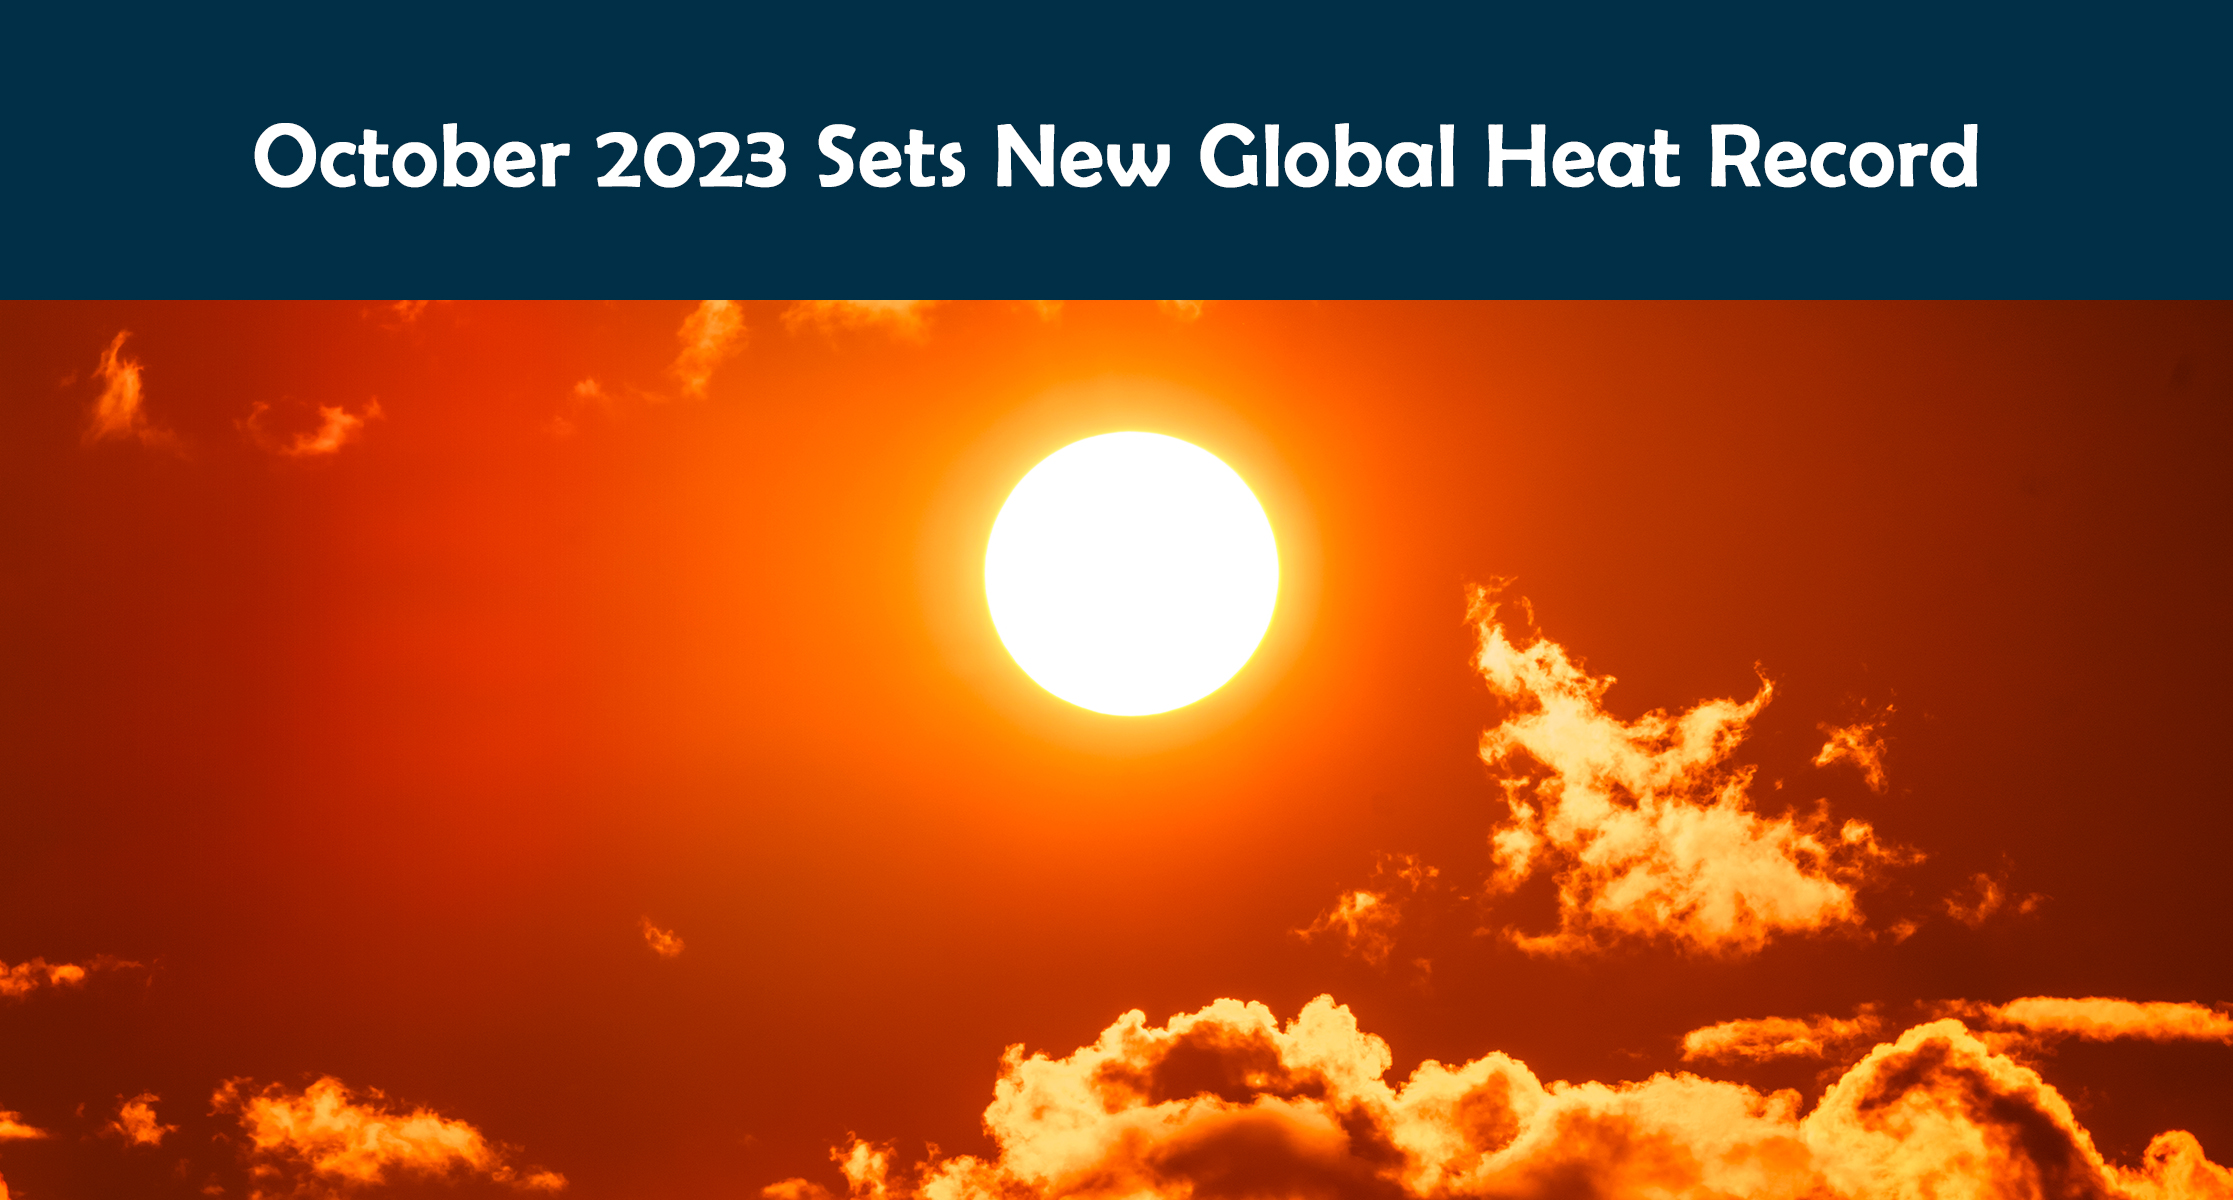 October 2023 Sets New Global Heat Record